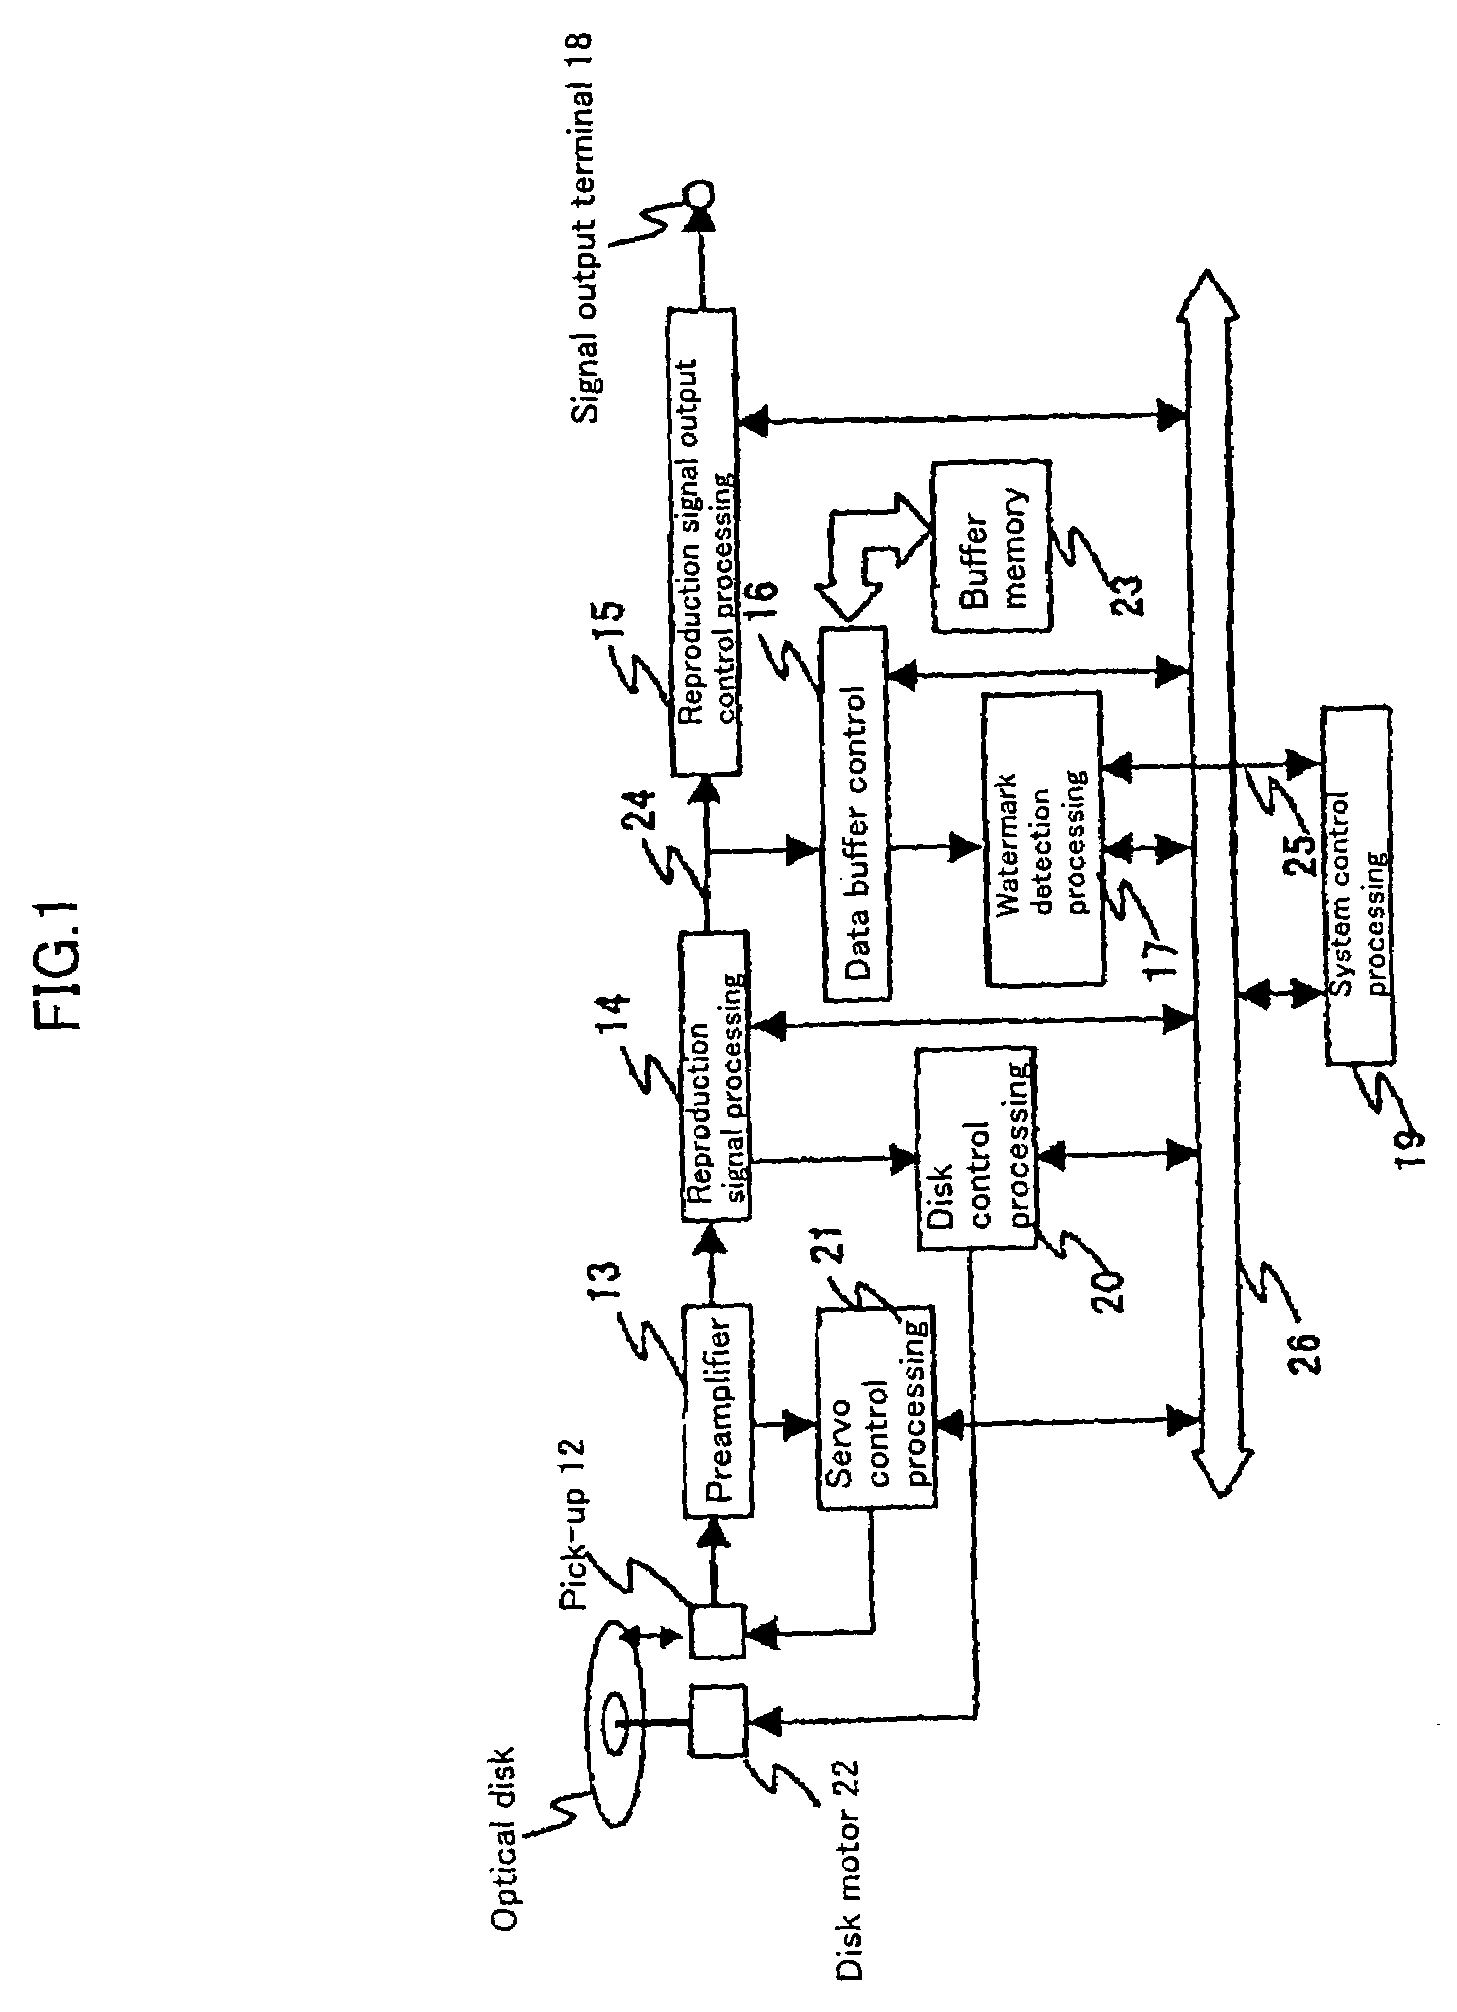 Method and apparatus for data reproduction